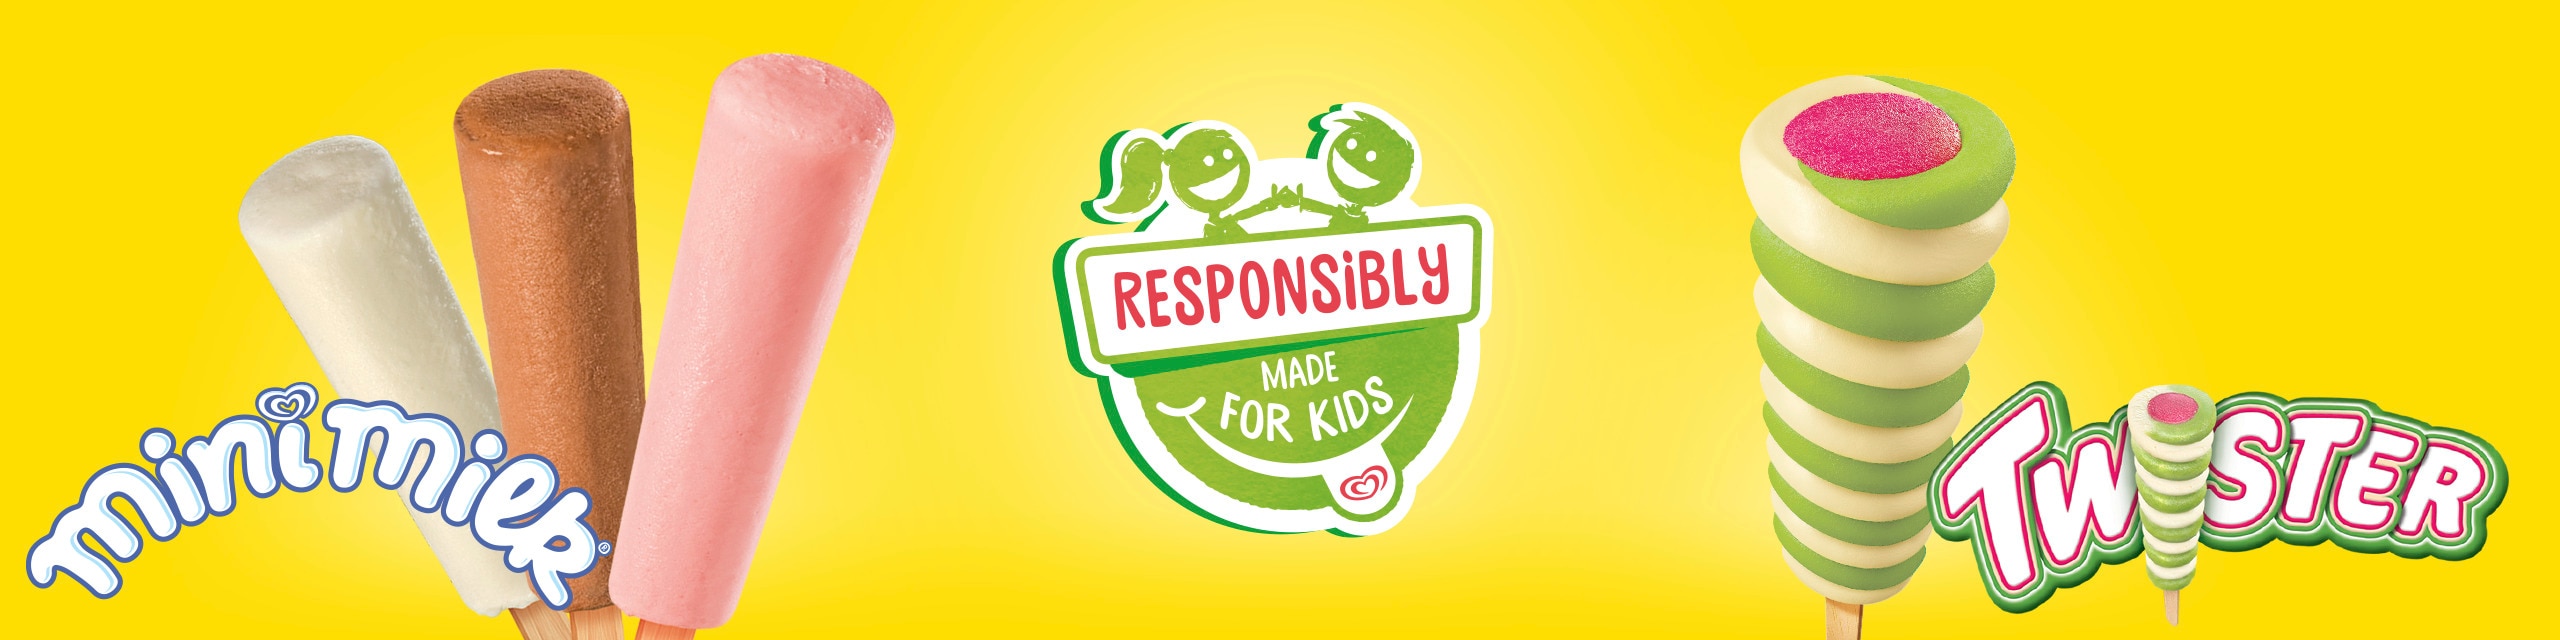 Responsibly Made For Kids